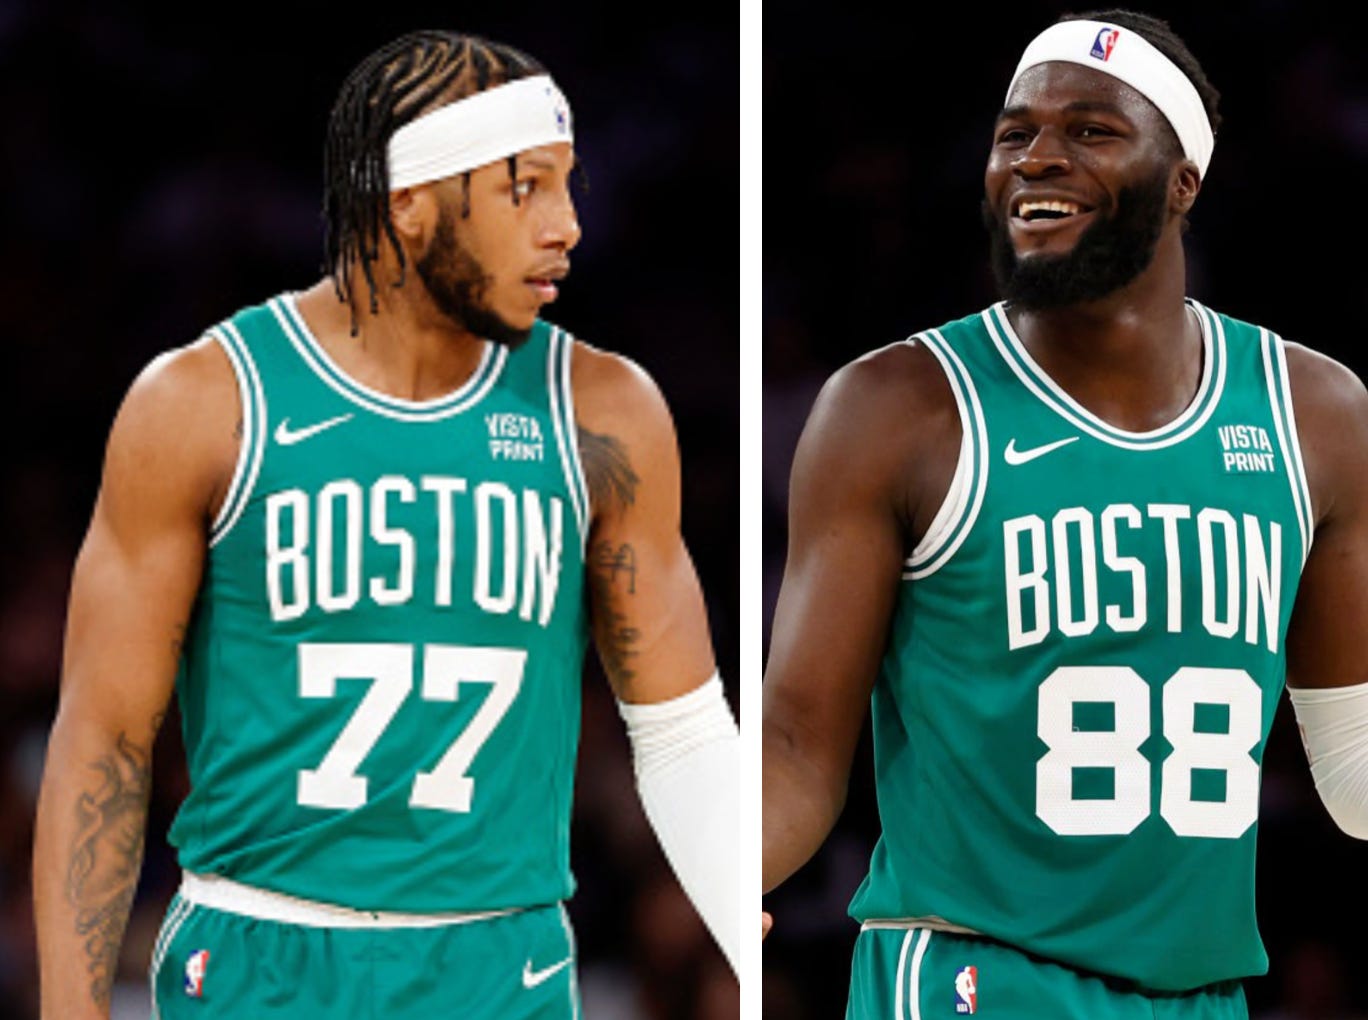 Every player in Celtics history who wore No. 77